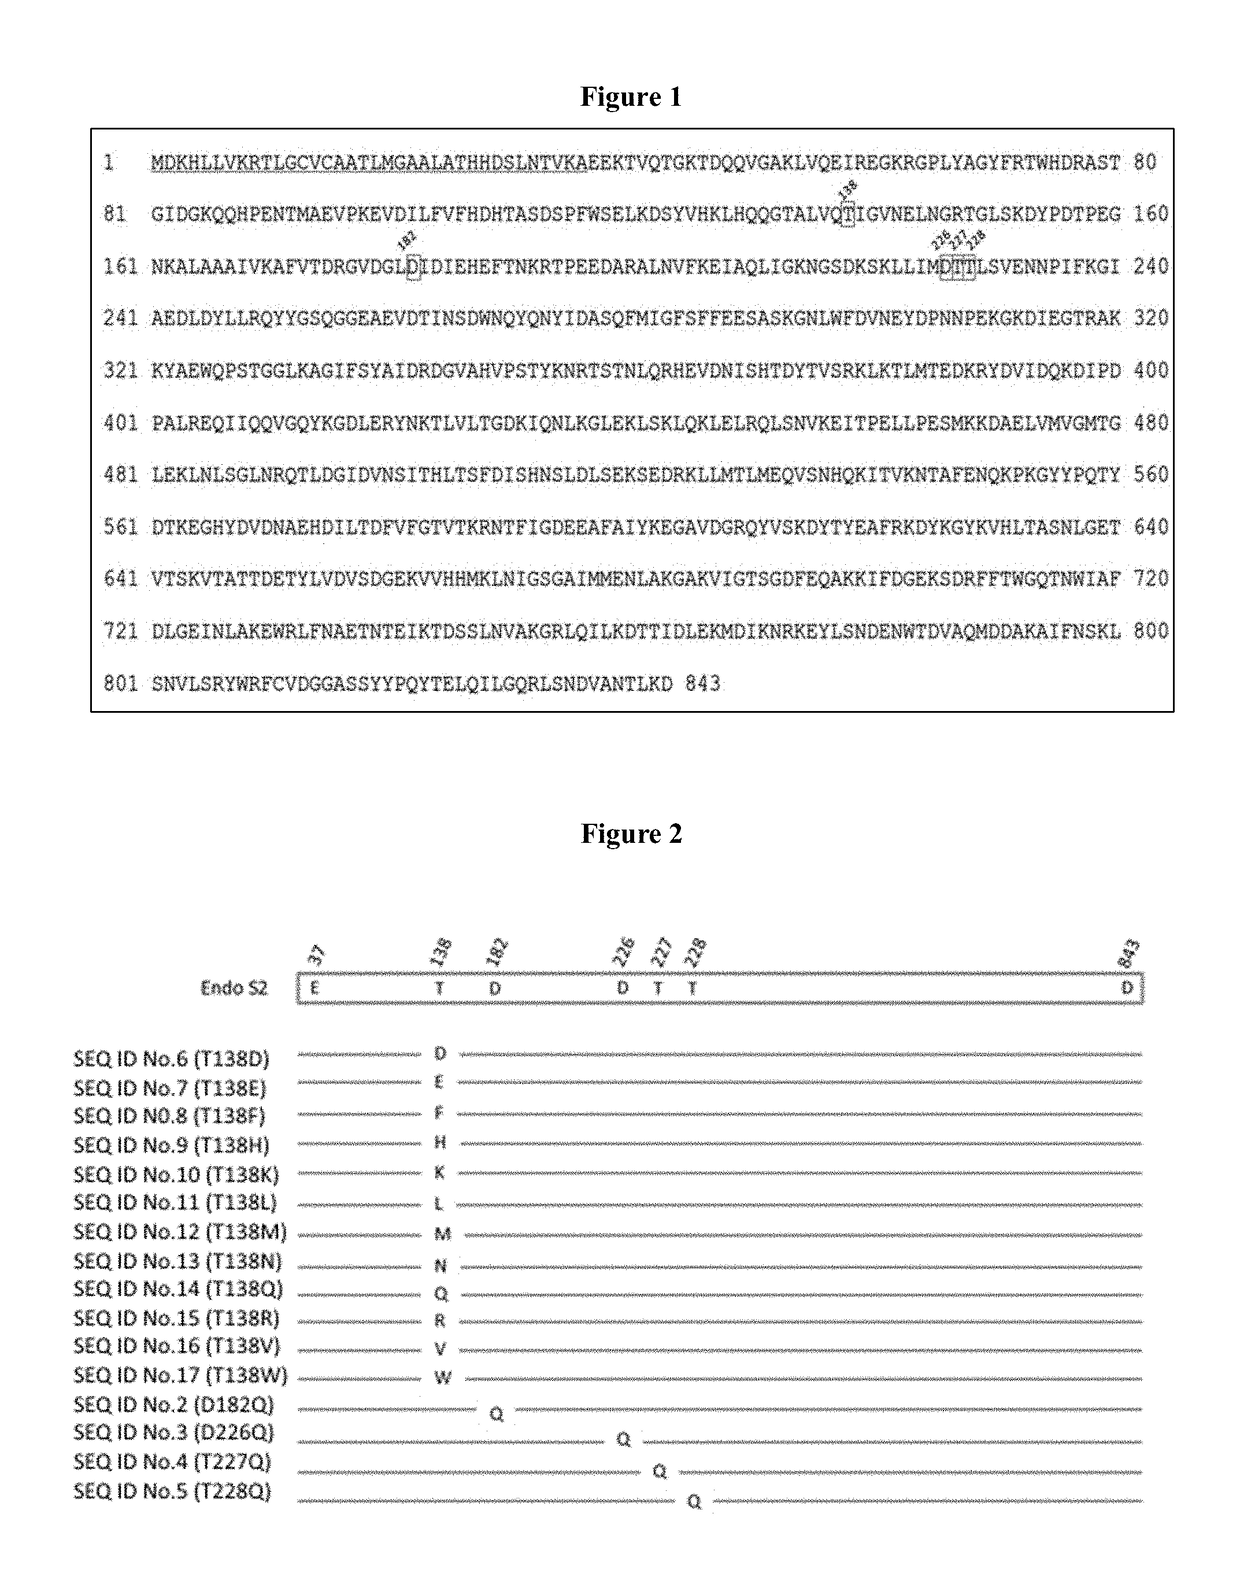 Endoglycosidase mutants for glycoprotein remodeling and methods of using it